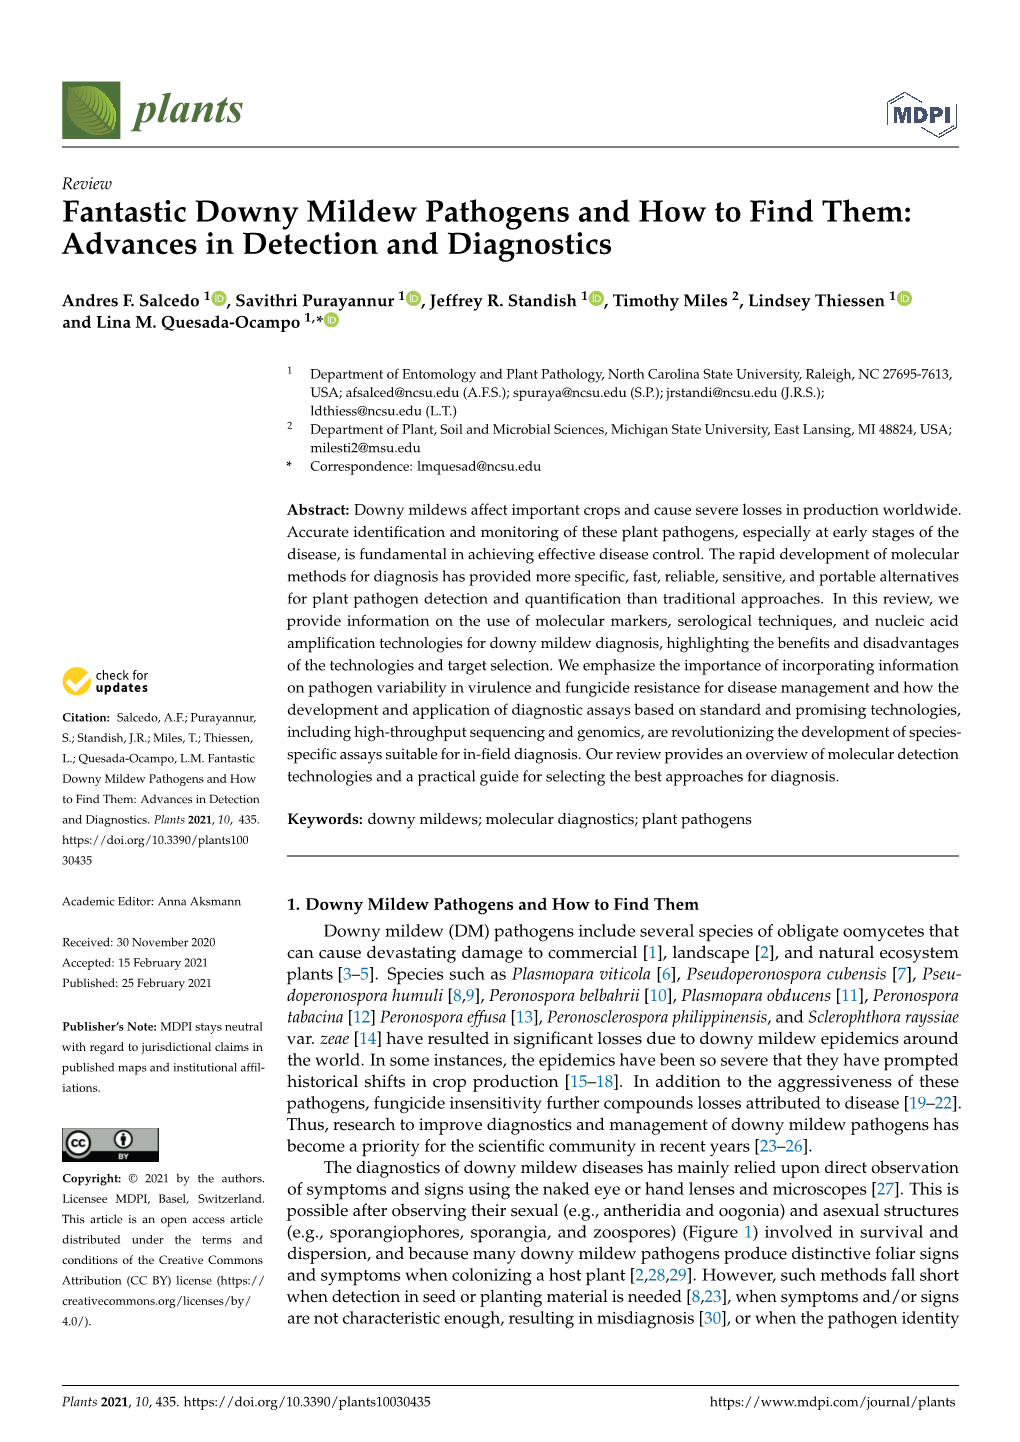 Fantastic Downy Mildew Pathogens and How to Find Them: Advances in Detection and Diagnostics